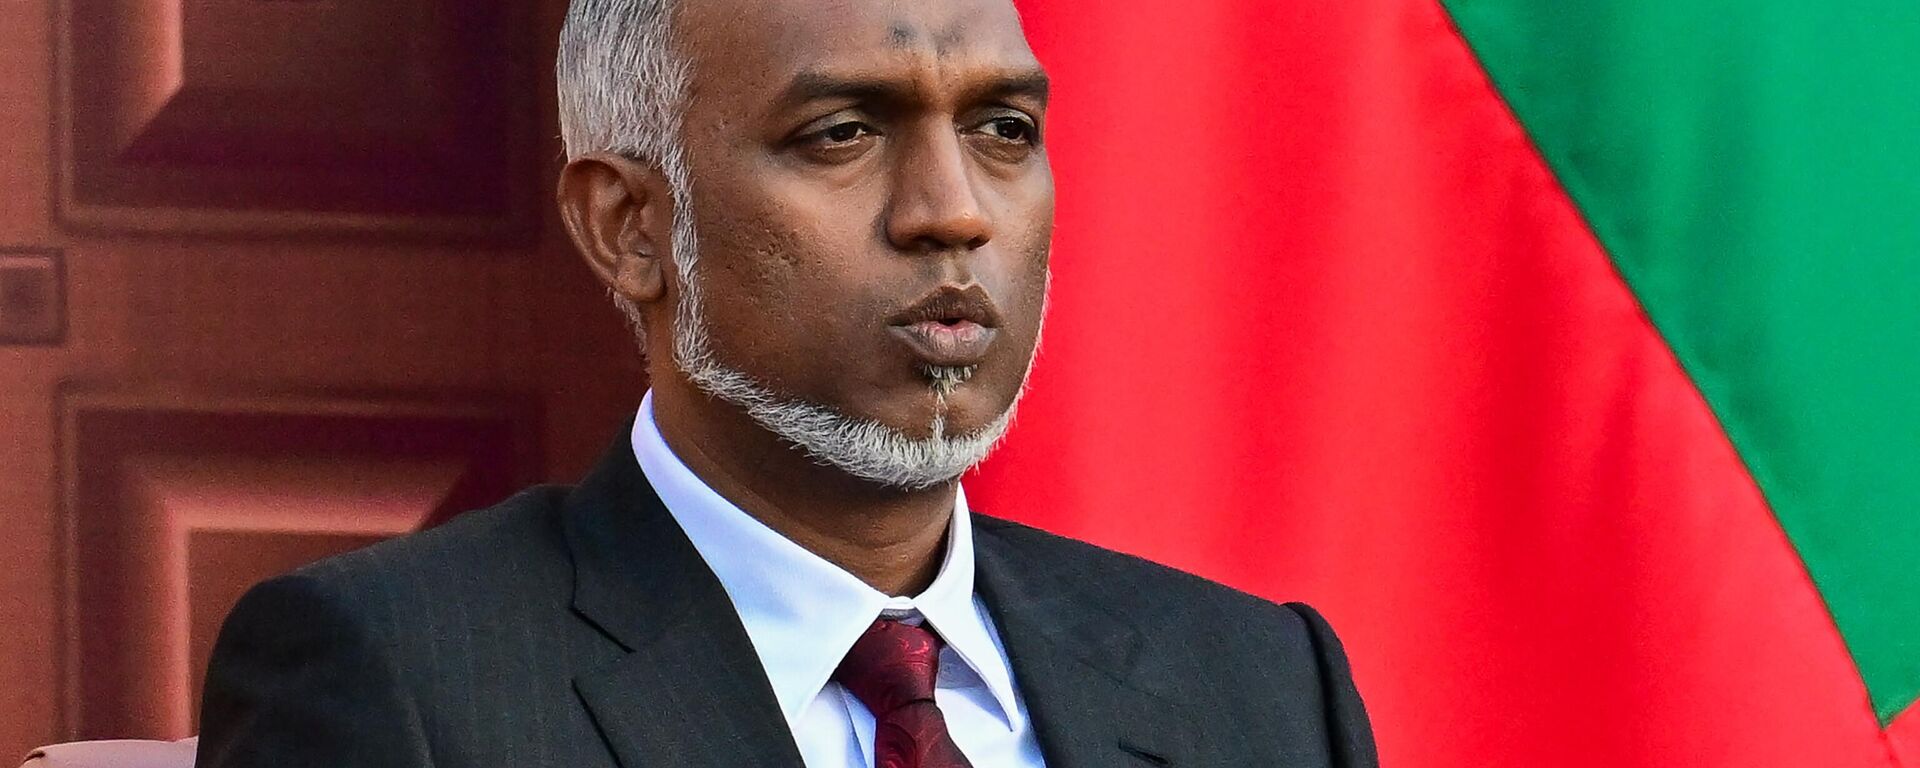 Maldives' President Mohamed Muizzu looks on after reading the oath during his inauguration ceremony in Male on November 17, 2023. President Mohamed Muizzu of the Maldives vowed on November 17 to expel Indian troops deployed in the strategically located archipelago, in his first speech to the nation after being sworn into power. - Sputnik भारत, 1920, 07.05.2024